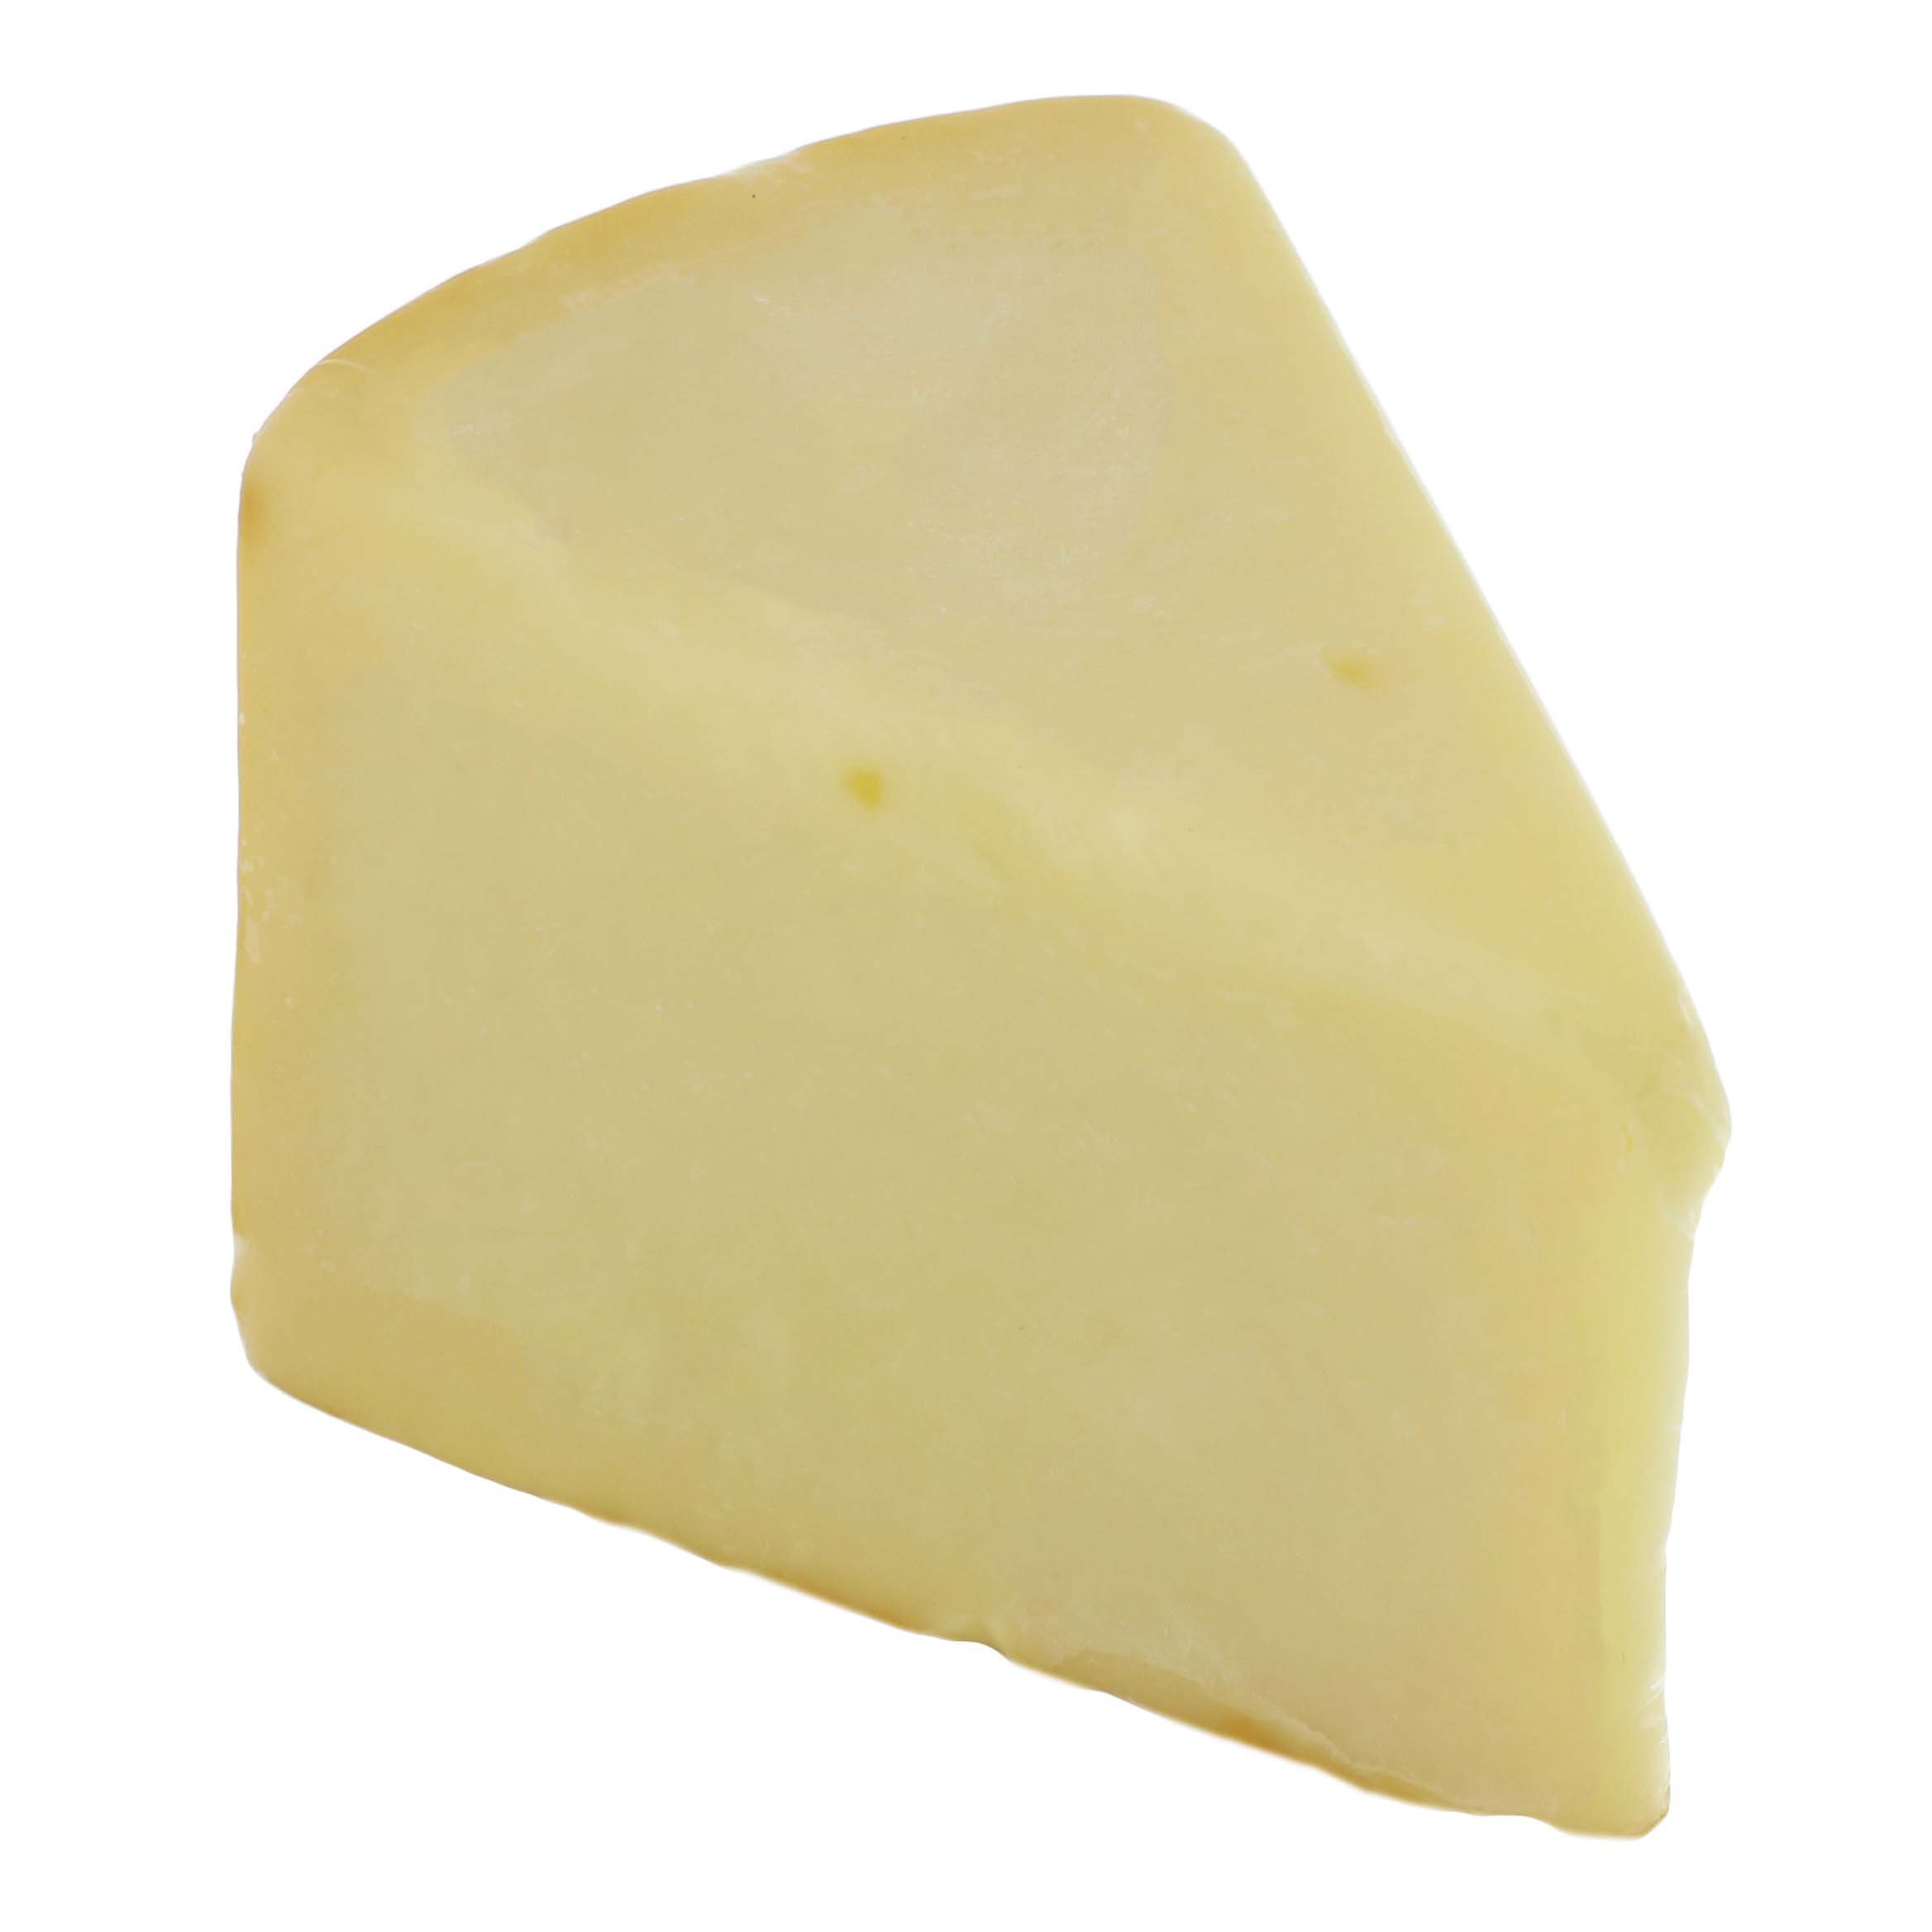 The Making of Farmhouse Cheddar